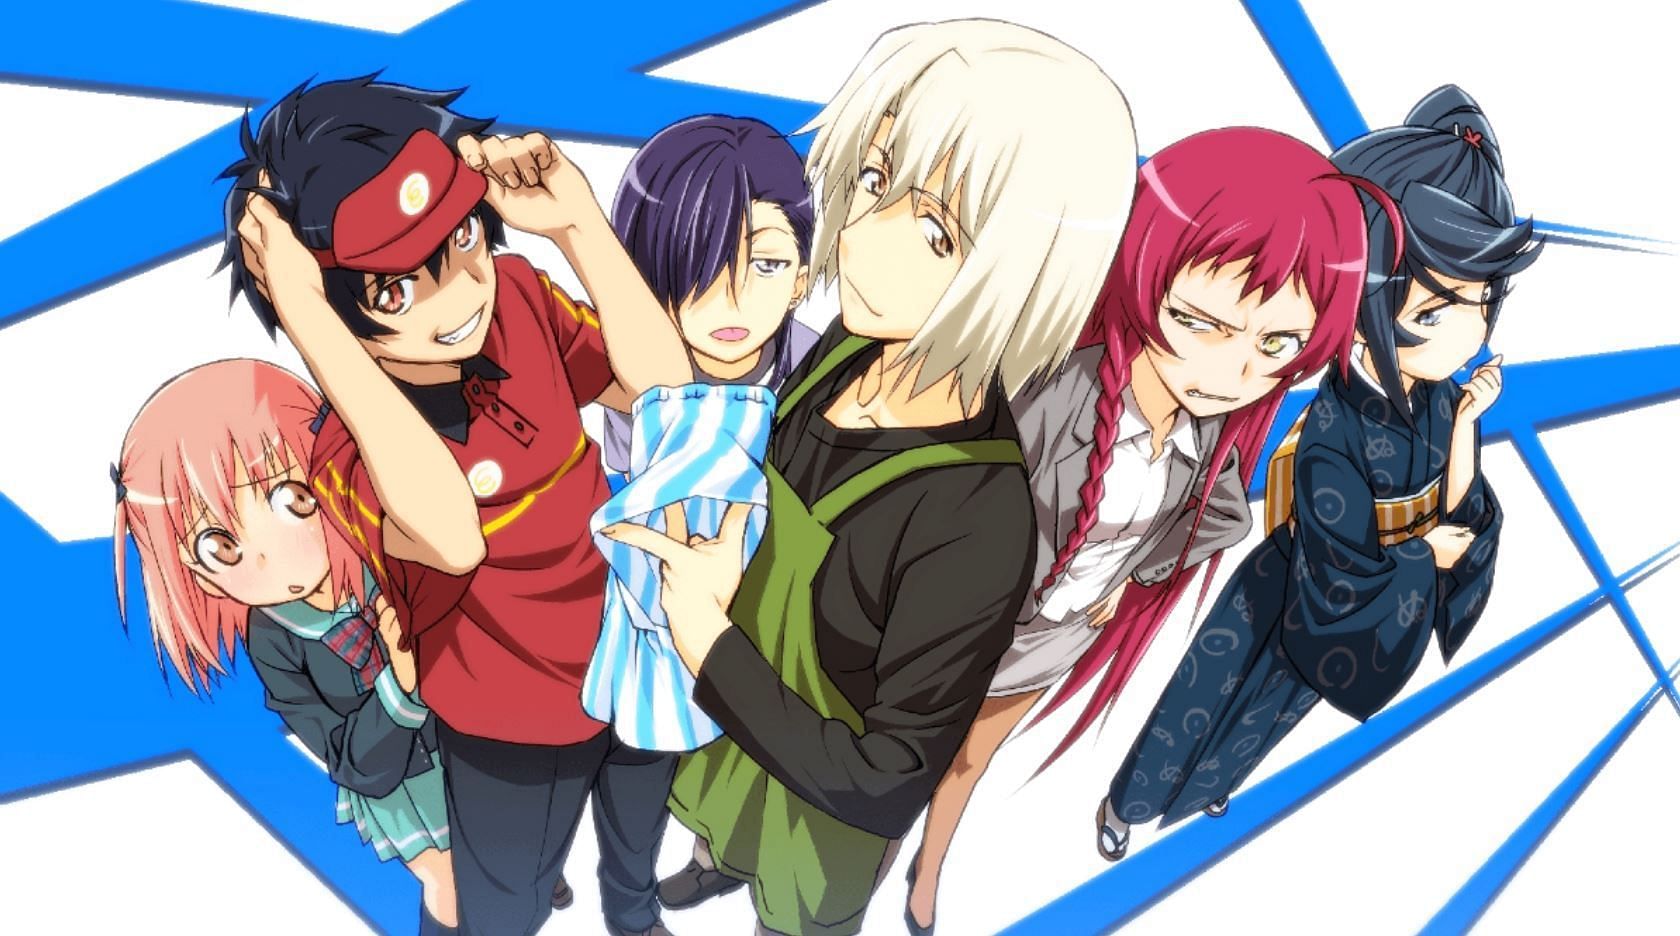 10 anime to watch if you like The Devil is a Part-Timer